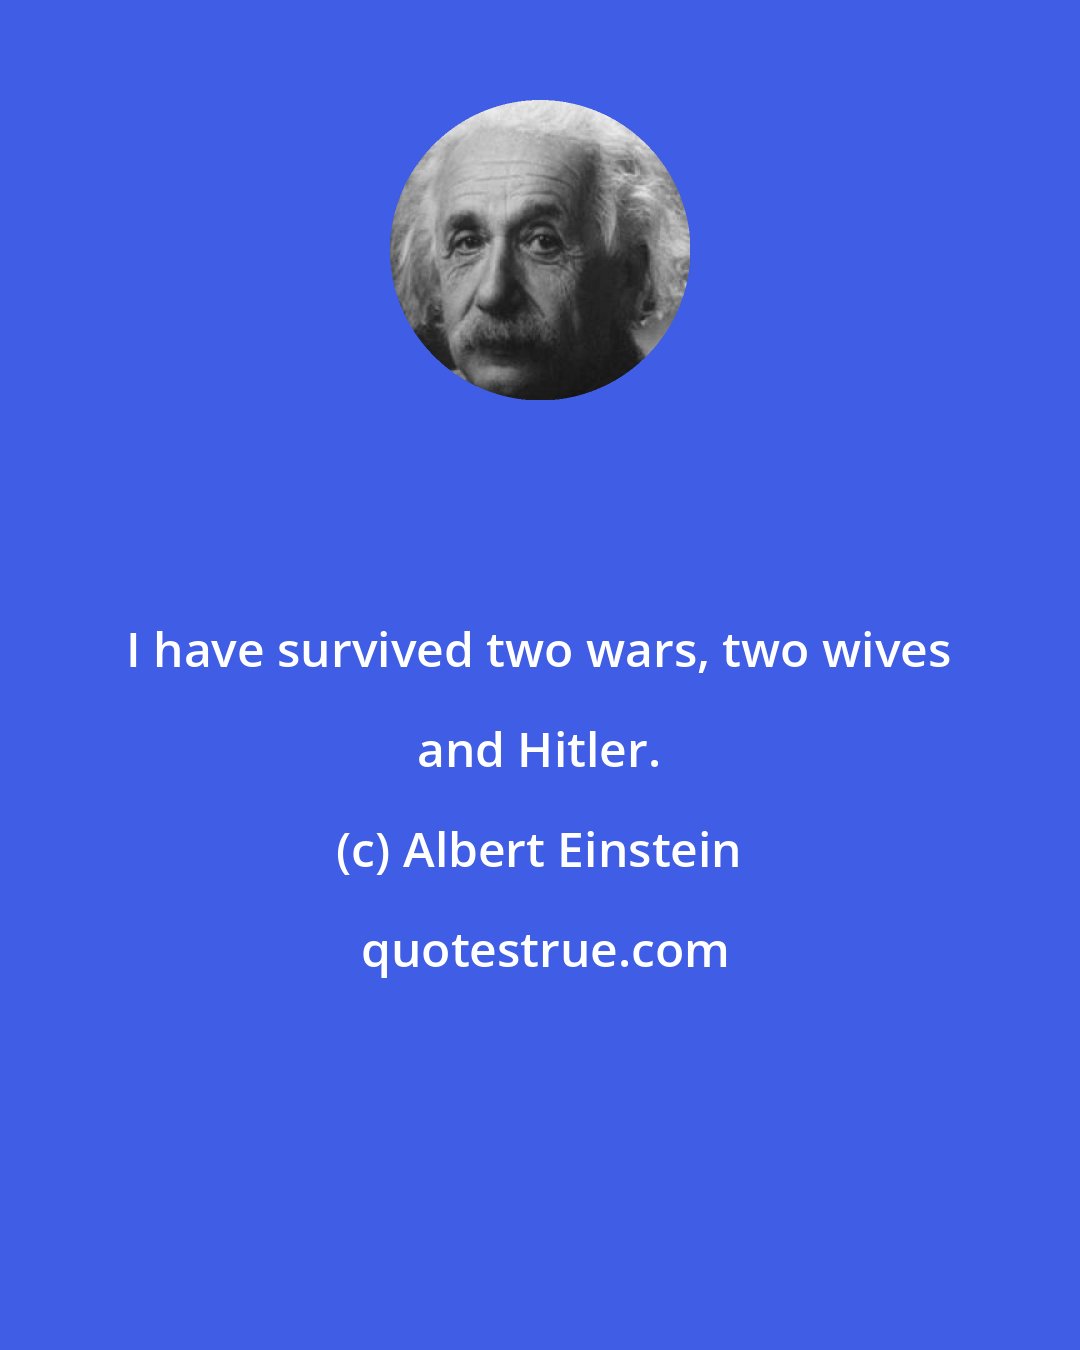 Albert Einstein: I have survived two wars, two wives and Hitler.